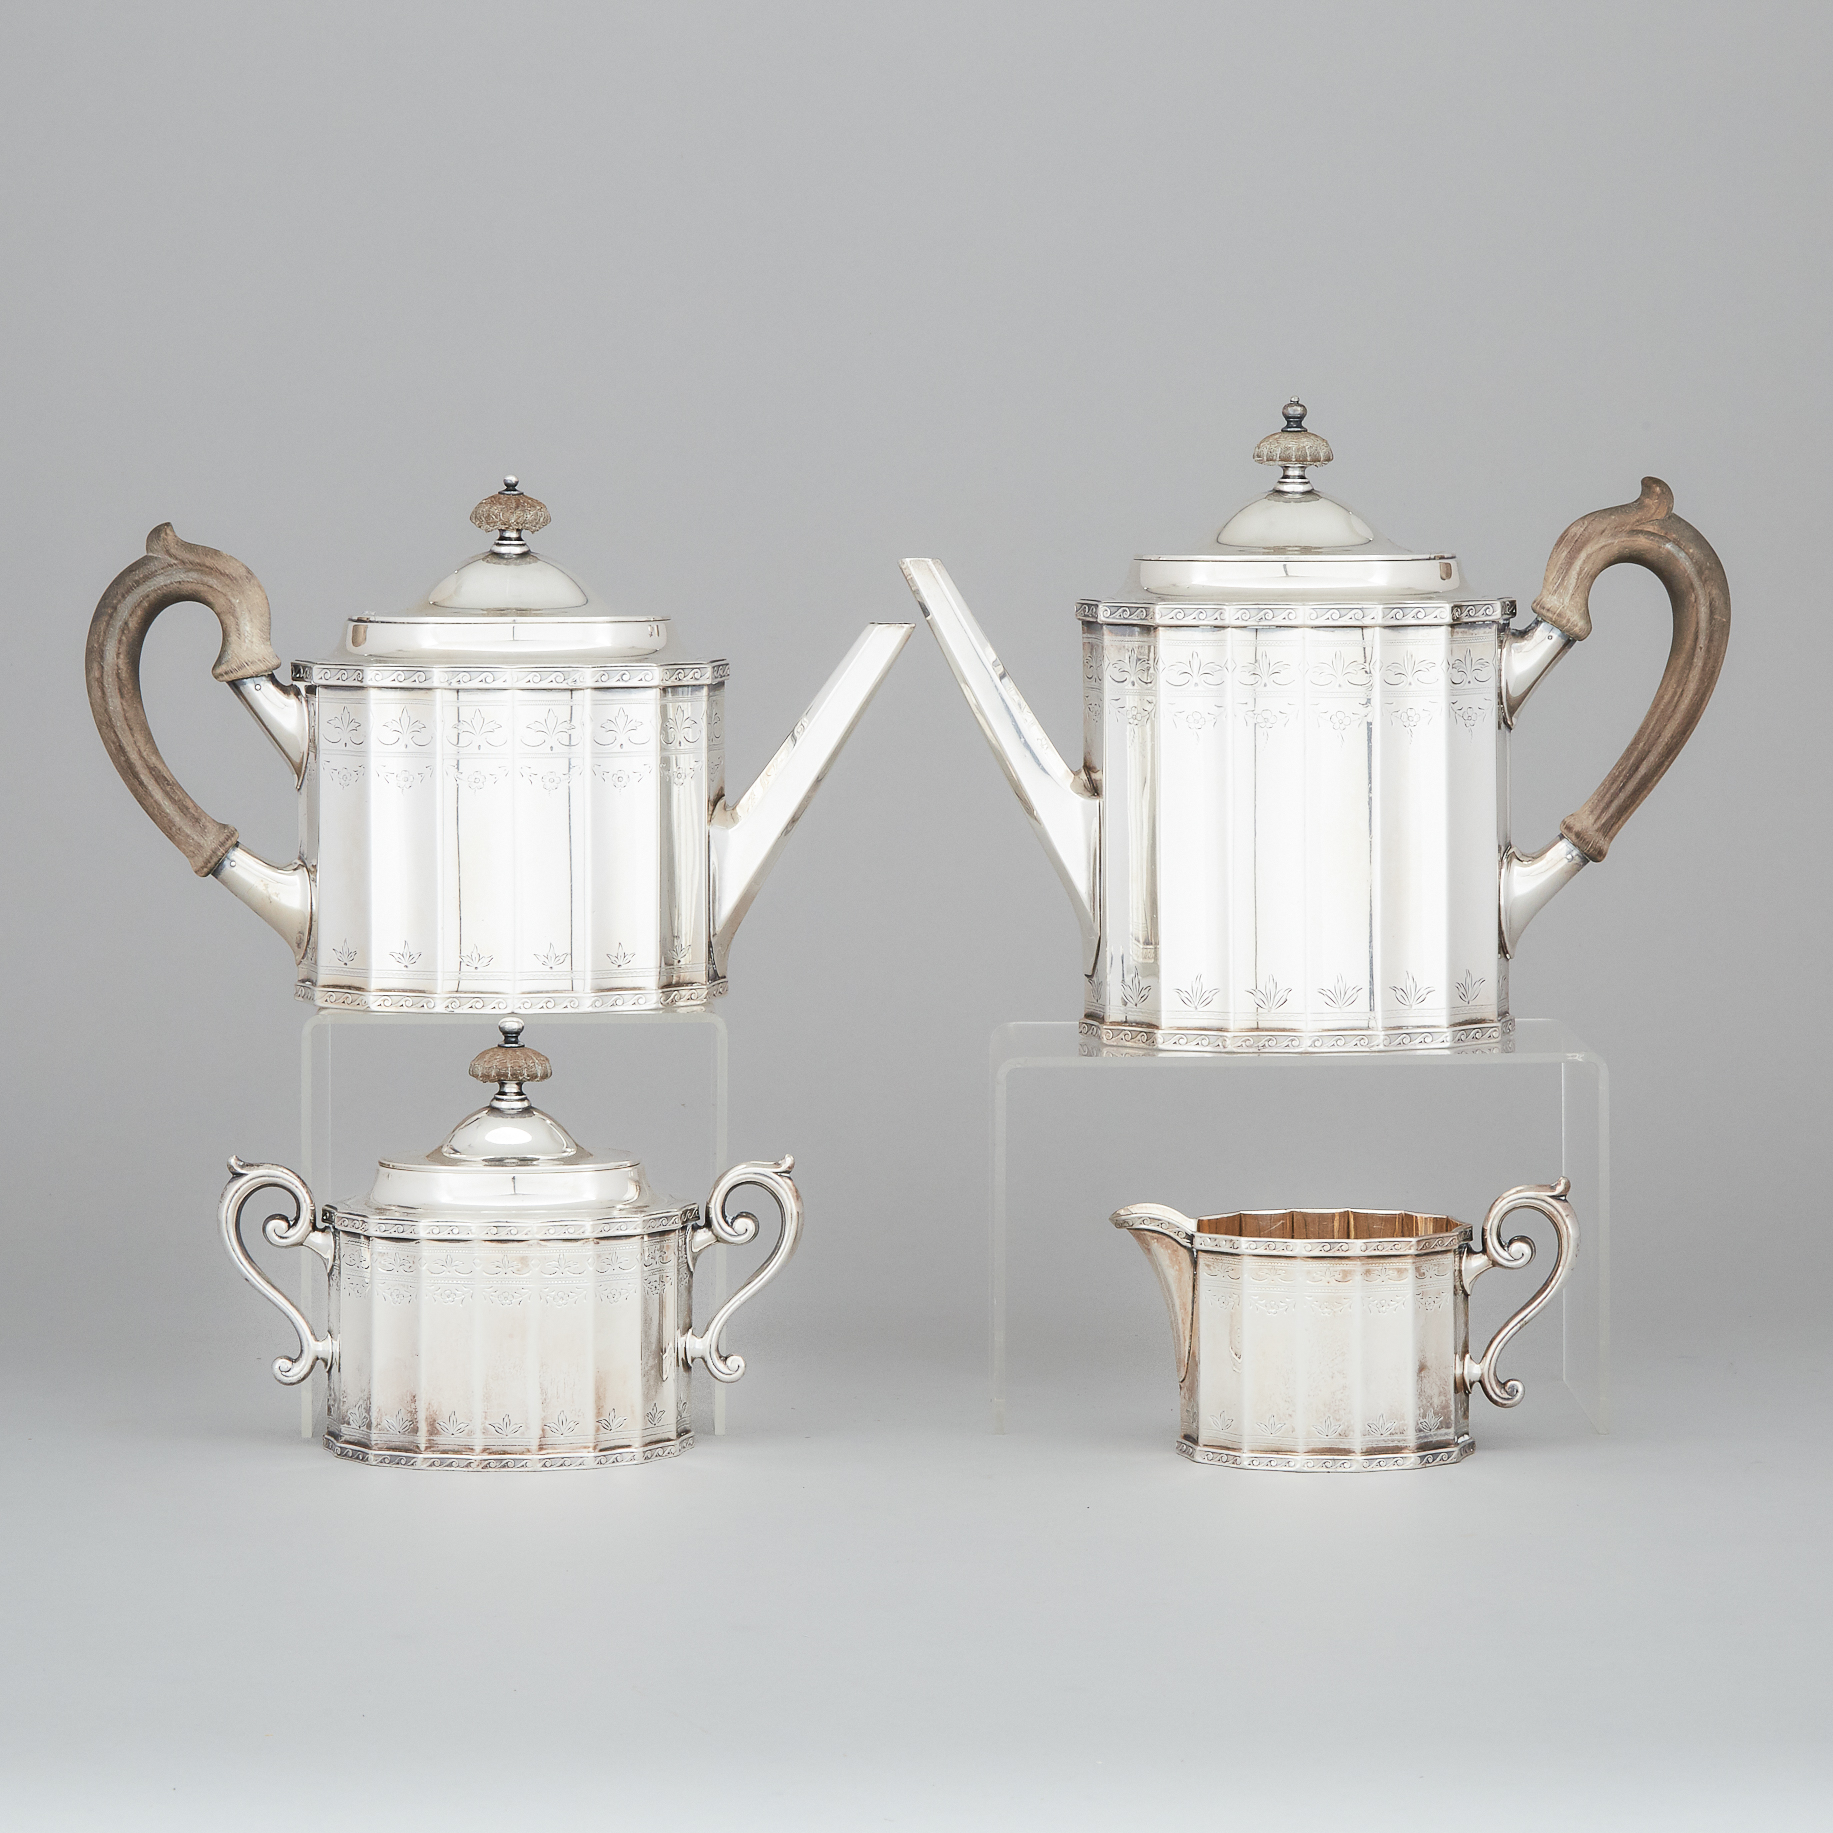 American Silver Tea and Coffee Service, Gorham Mfg. Co., Providence, R.I., 1910